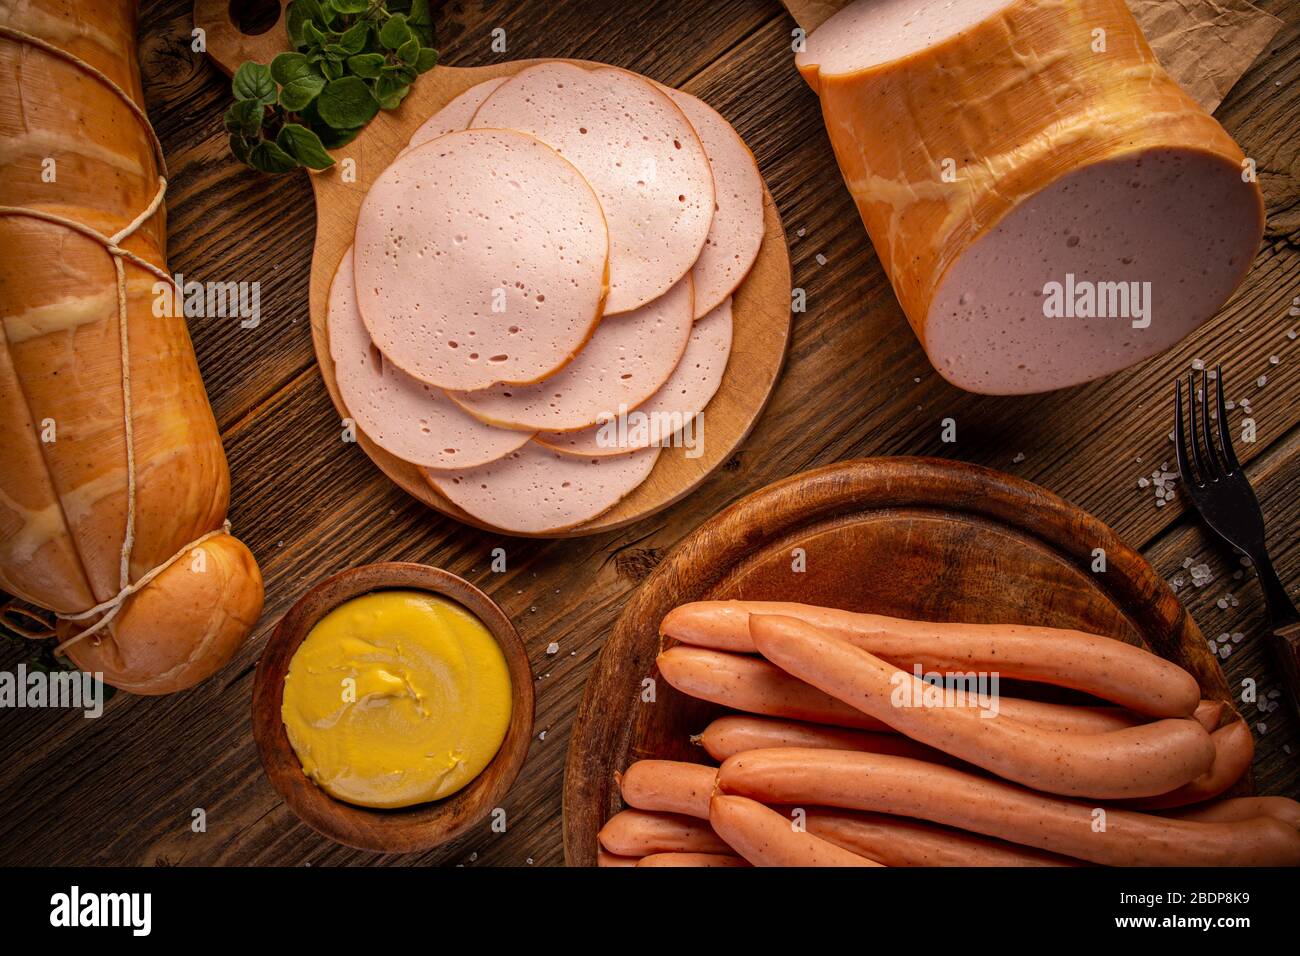 Composition of deli meats and Wiener sausages served with mustard on wooden cutting board, flat lay Stock Photo